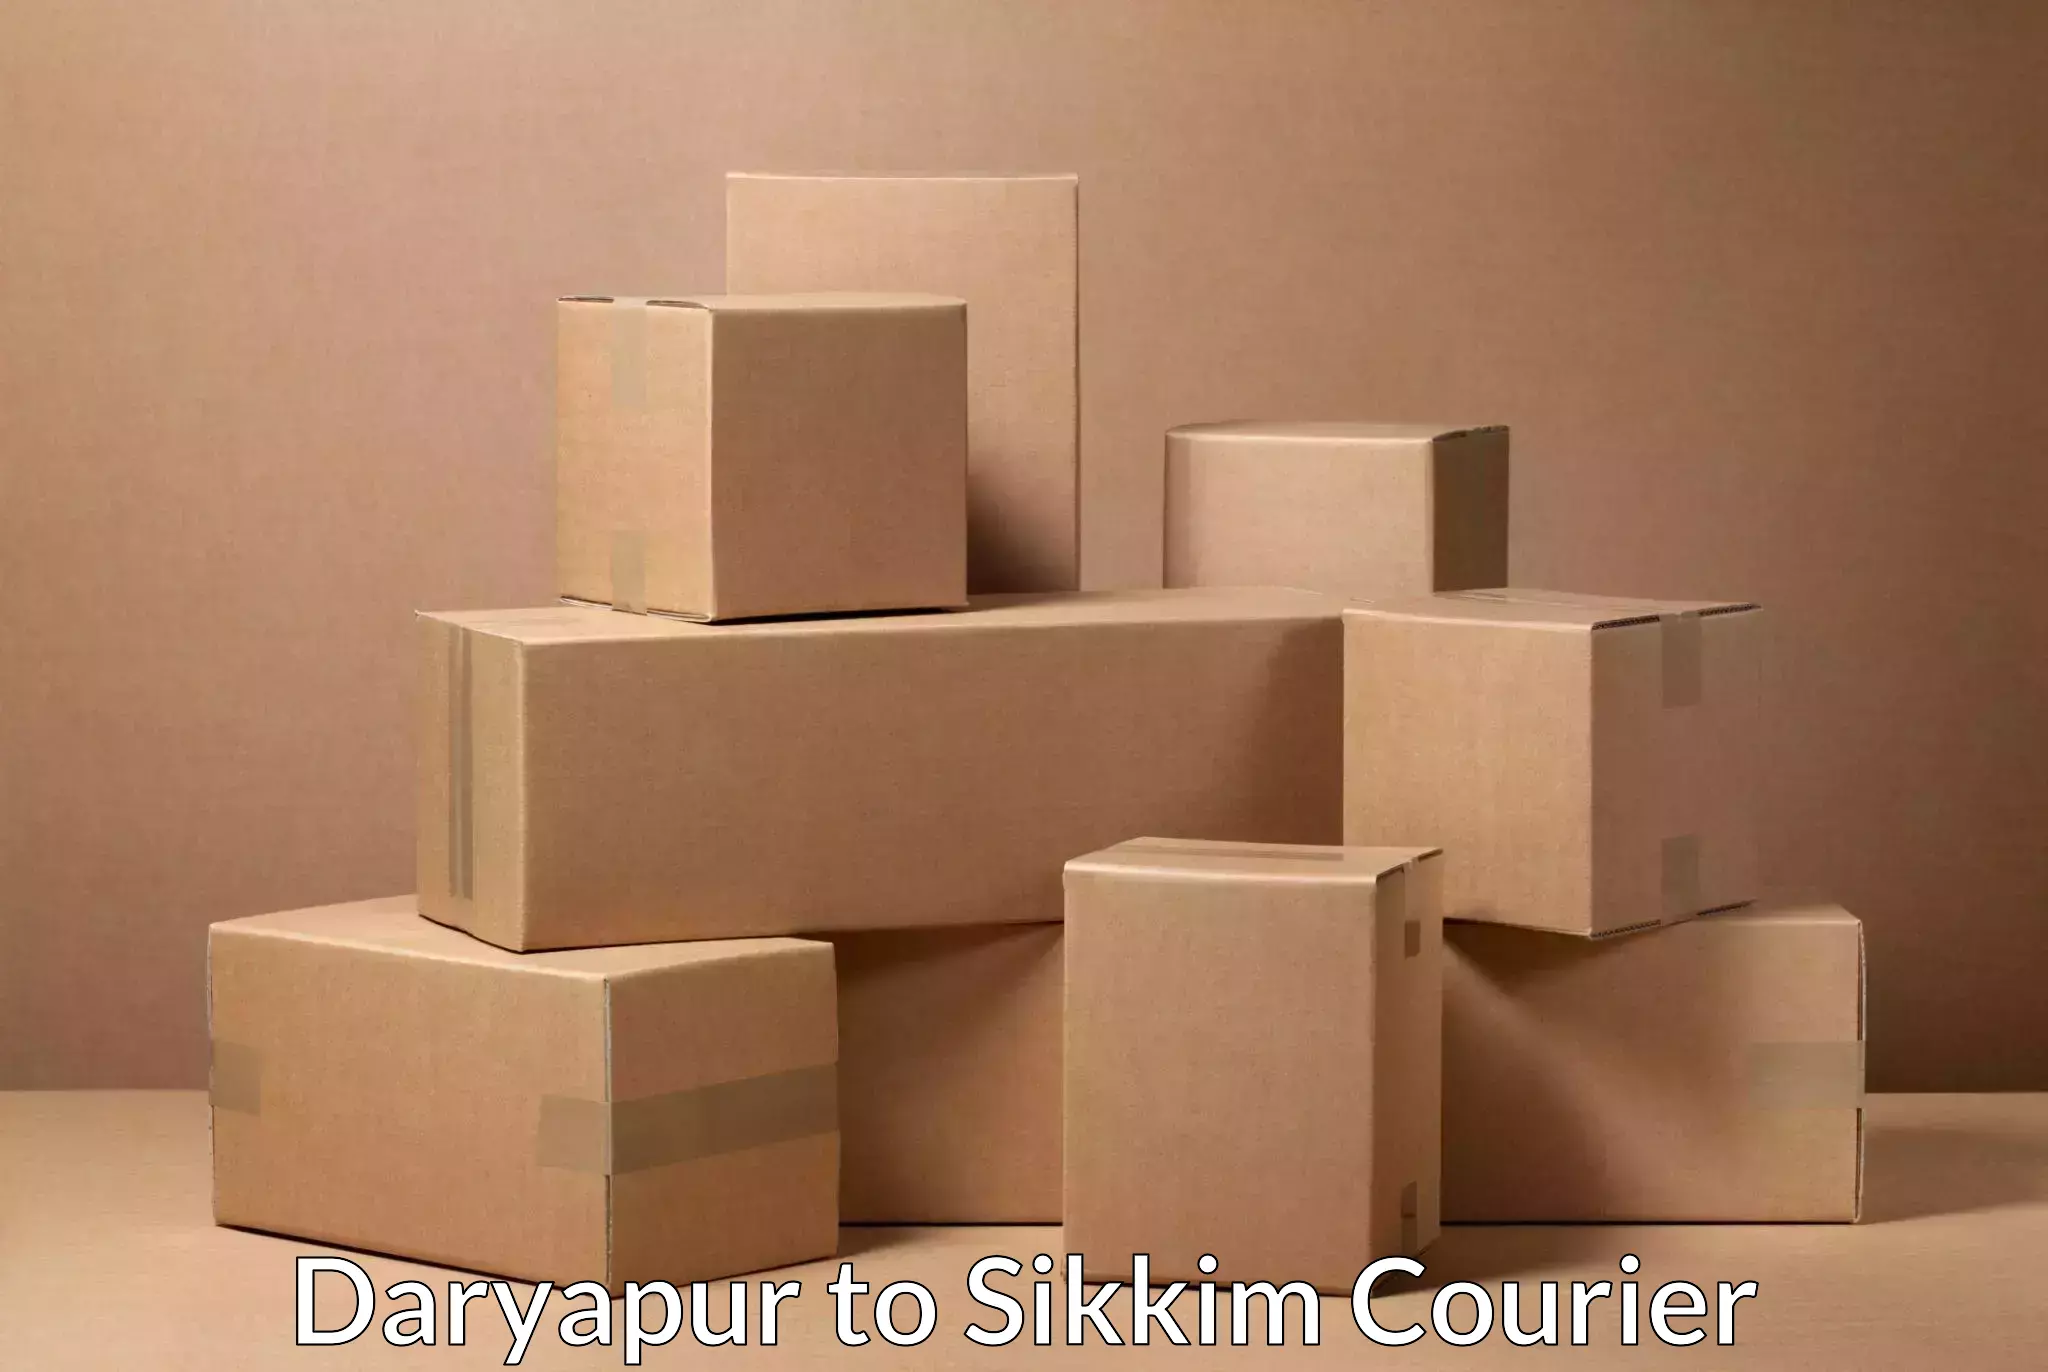 Advanced shipping technology Daryapur to North Sikkim